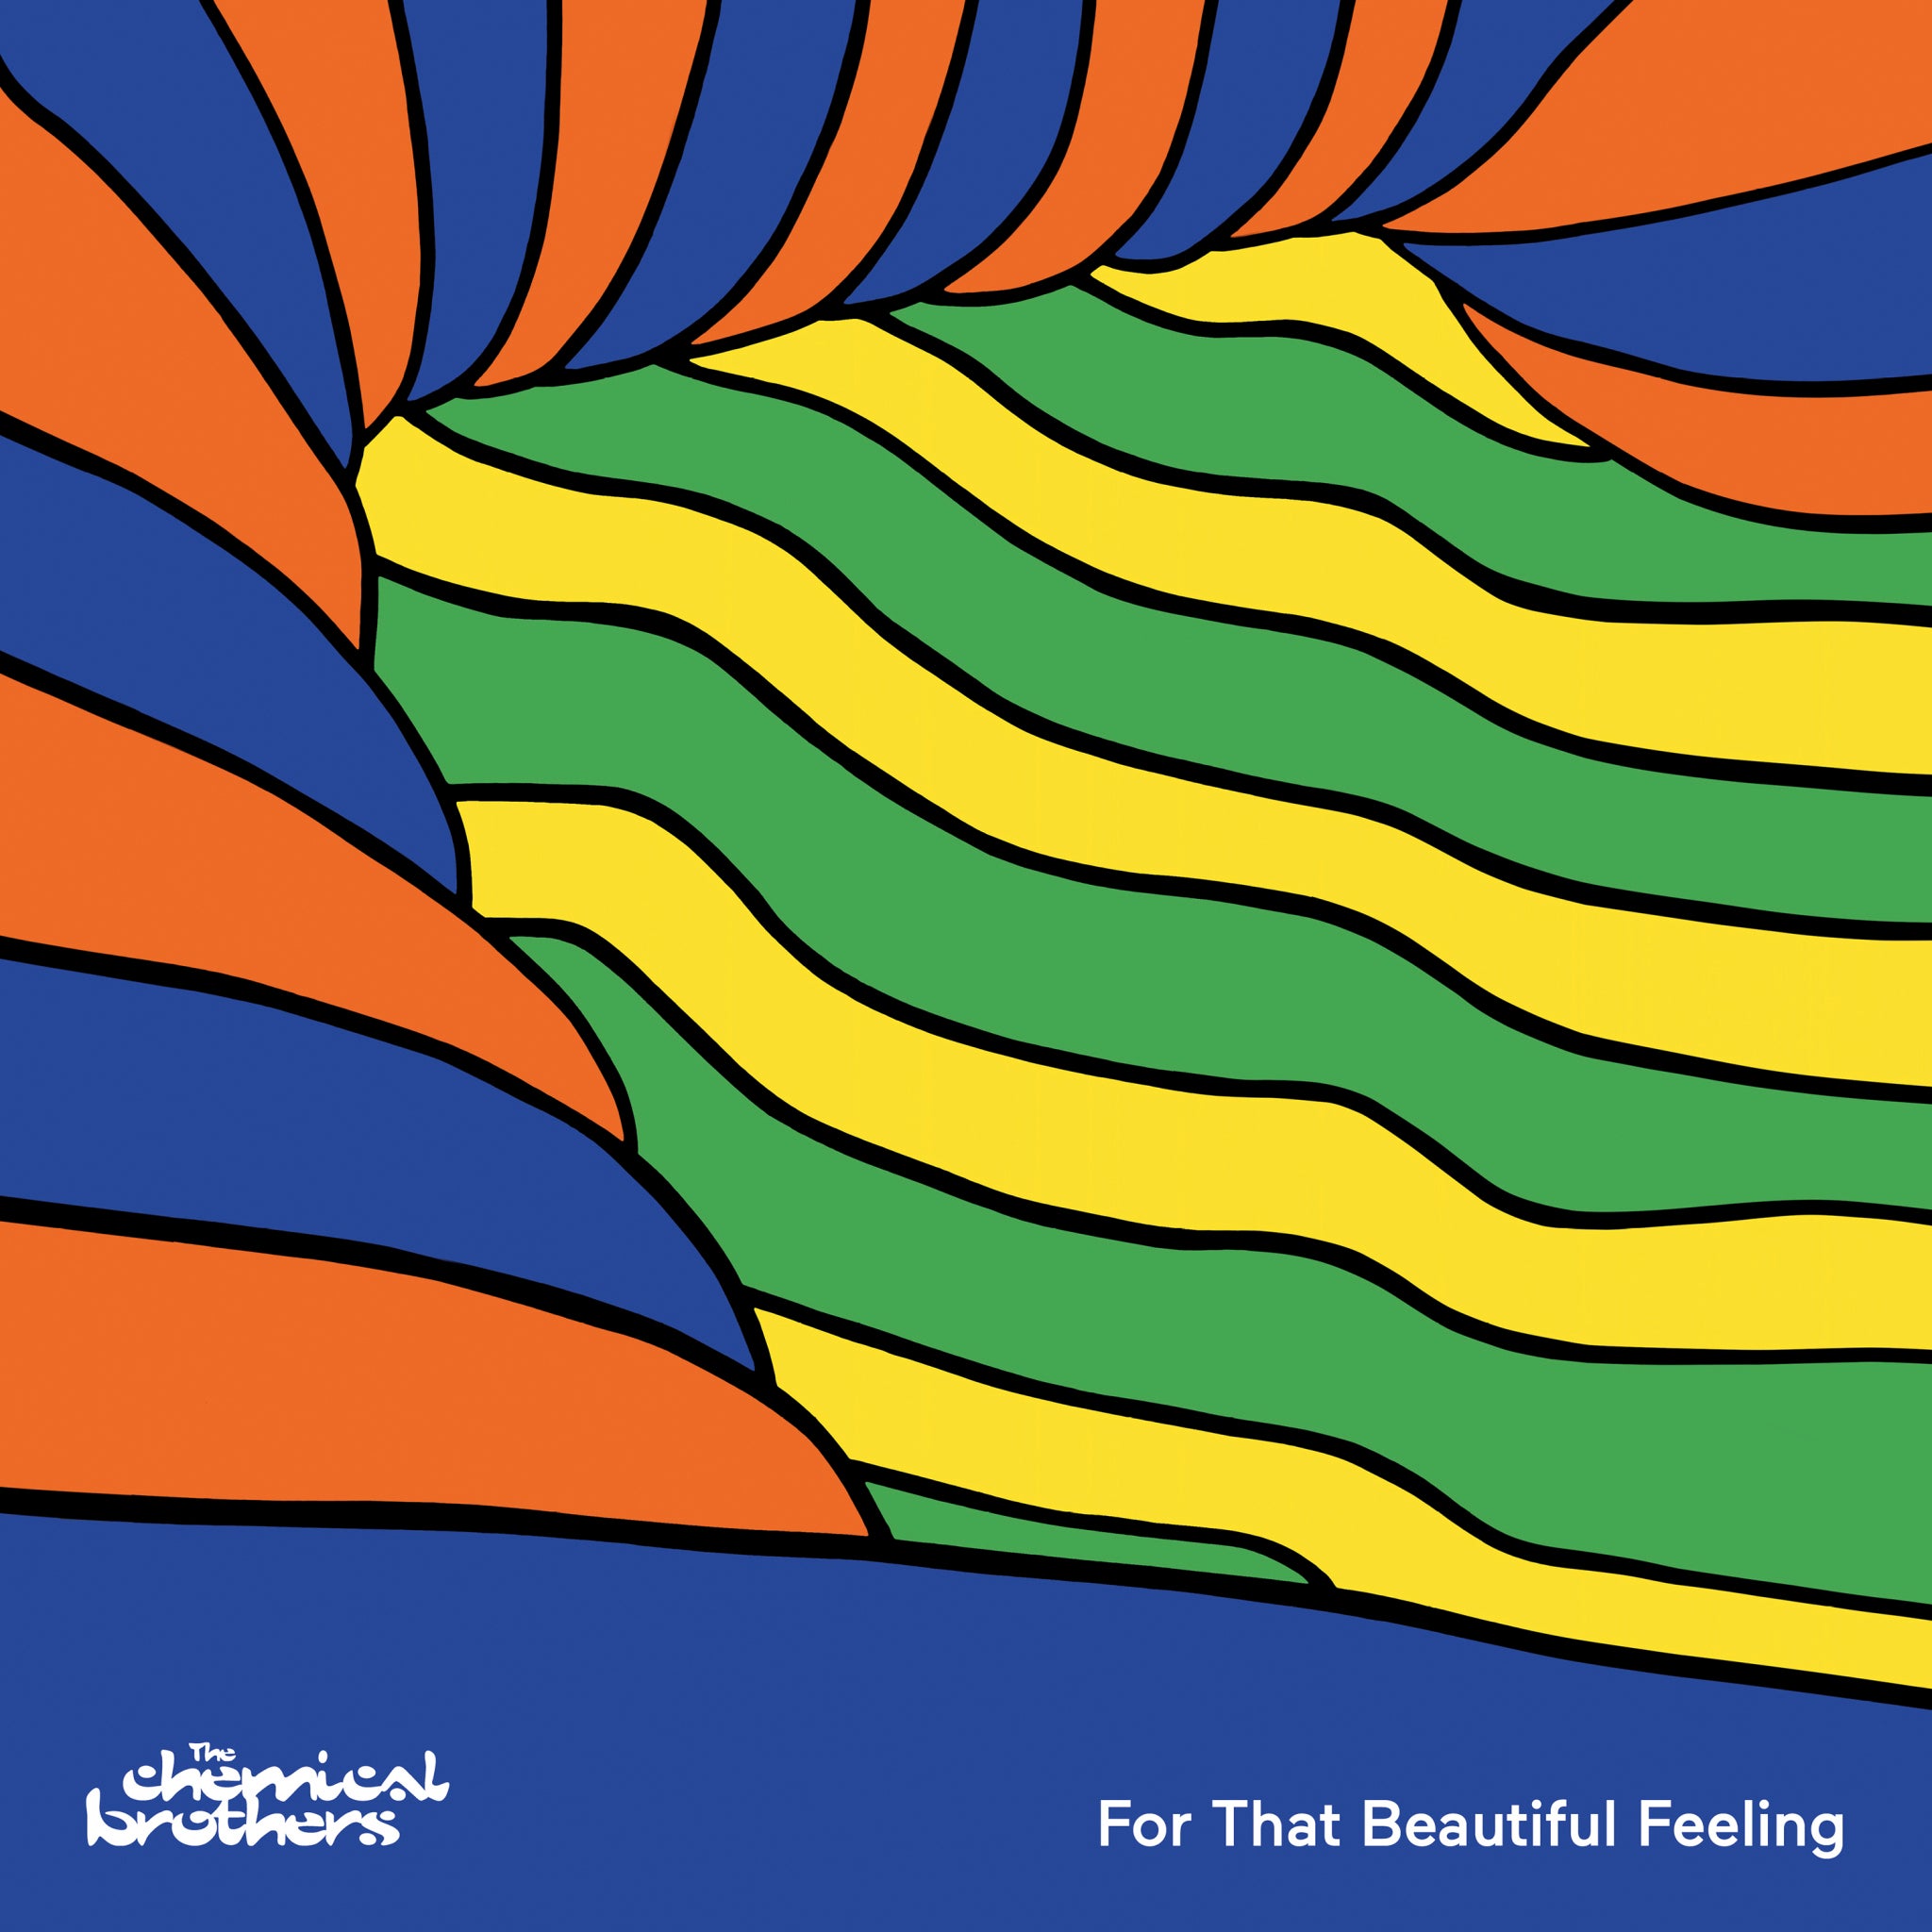 Music Review - Chemical Brothers